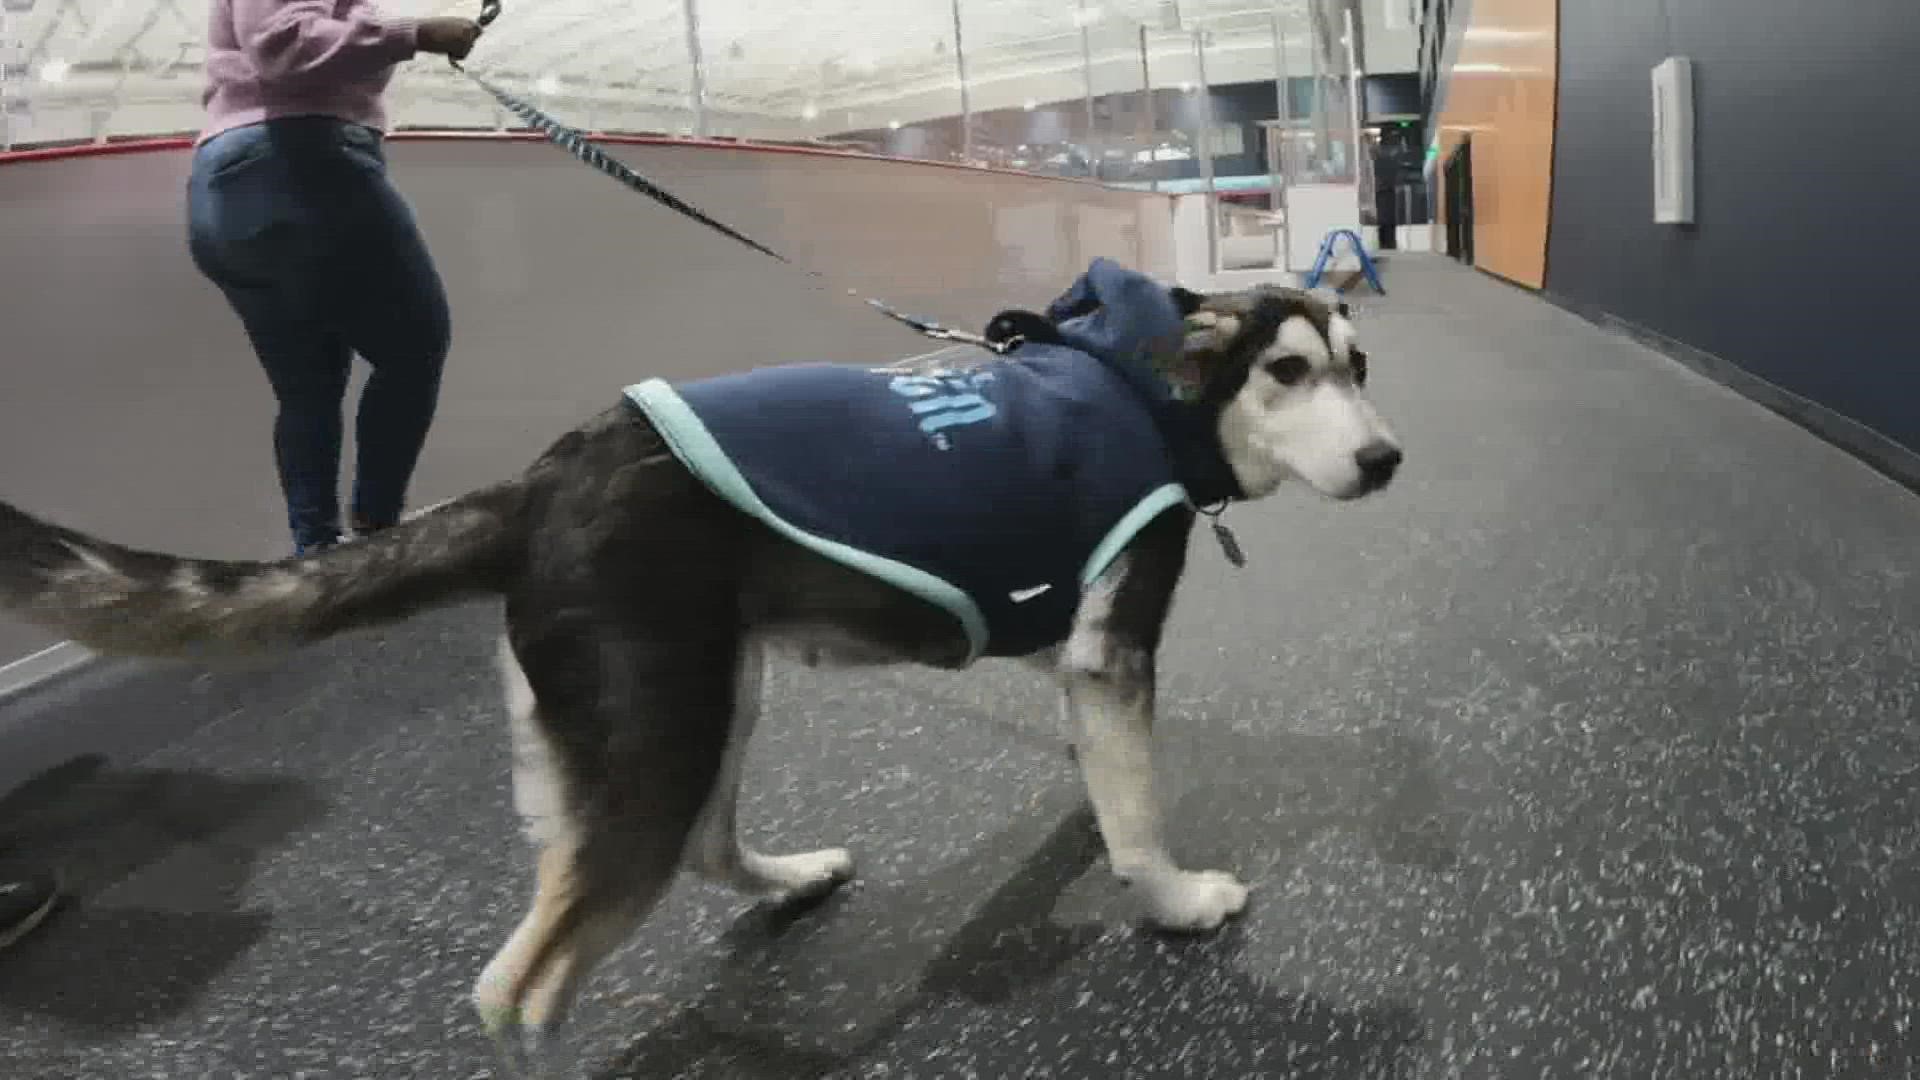 Four-month-old Husky mix Davy Jones is bringing new energy to the Seattle Kraken team and Climate Pledge Arena.